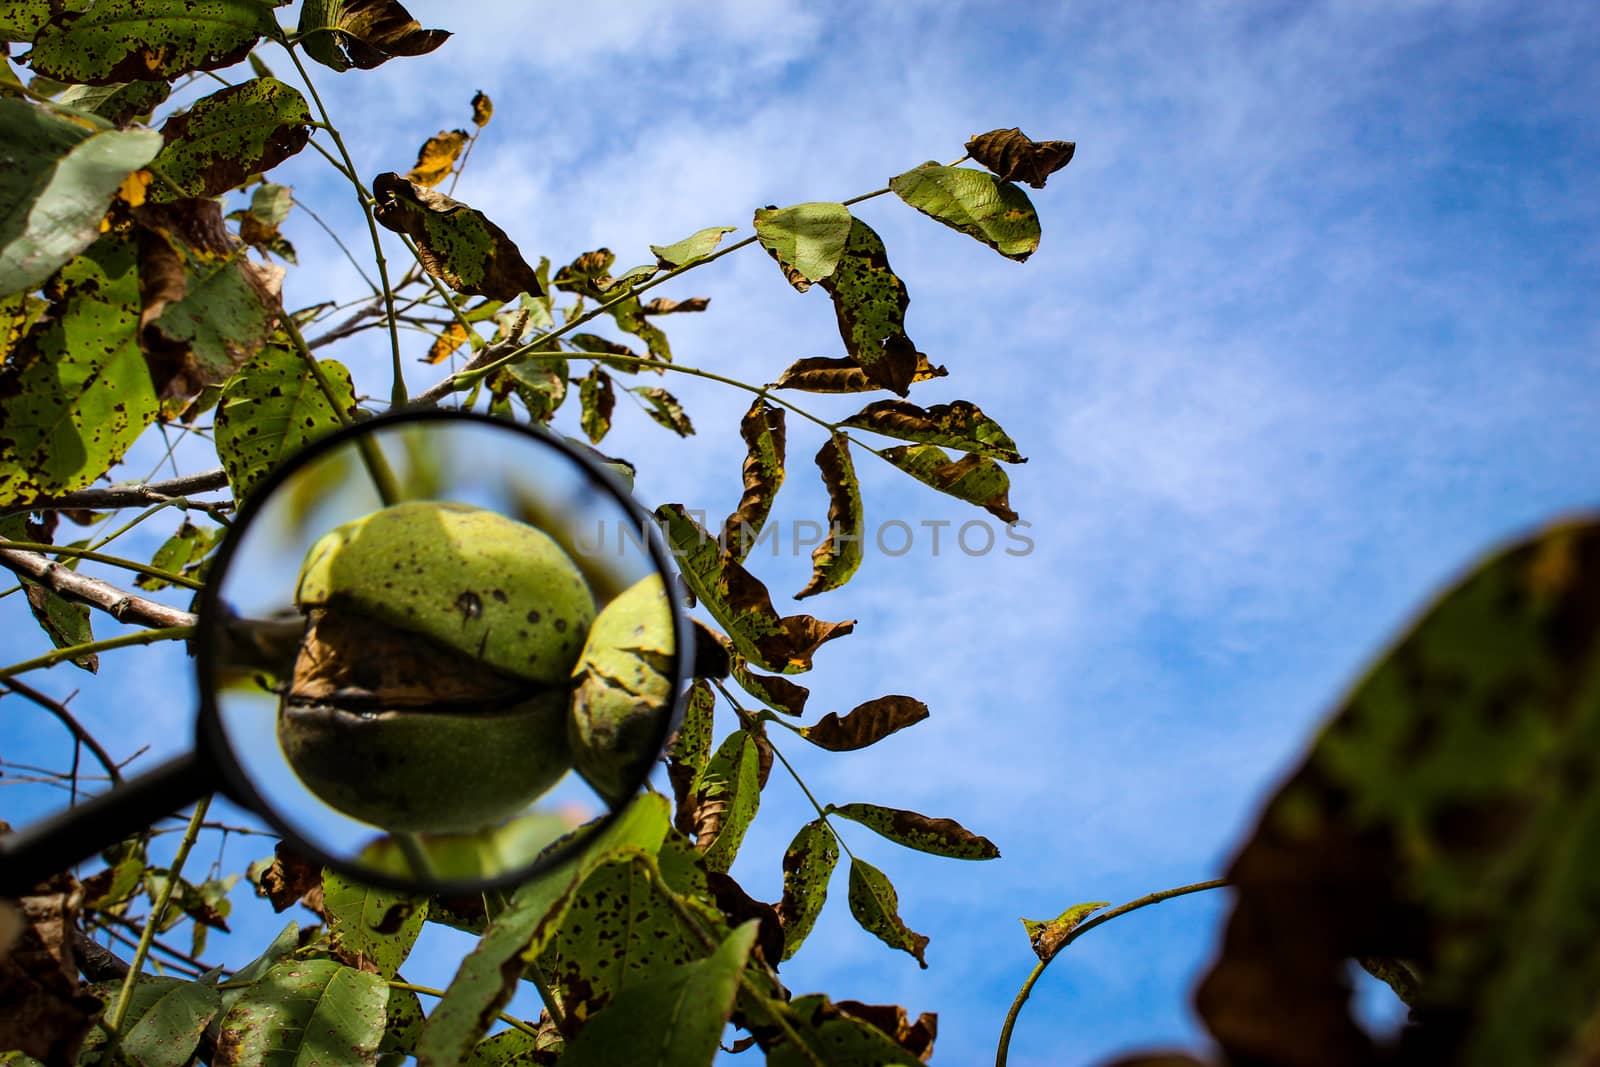 Walnut fruit enlarged with a magnifying glass. Close up of a ripe walnut inside a cracked green shell on a branch with the sky in the background. by mahirrov